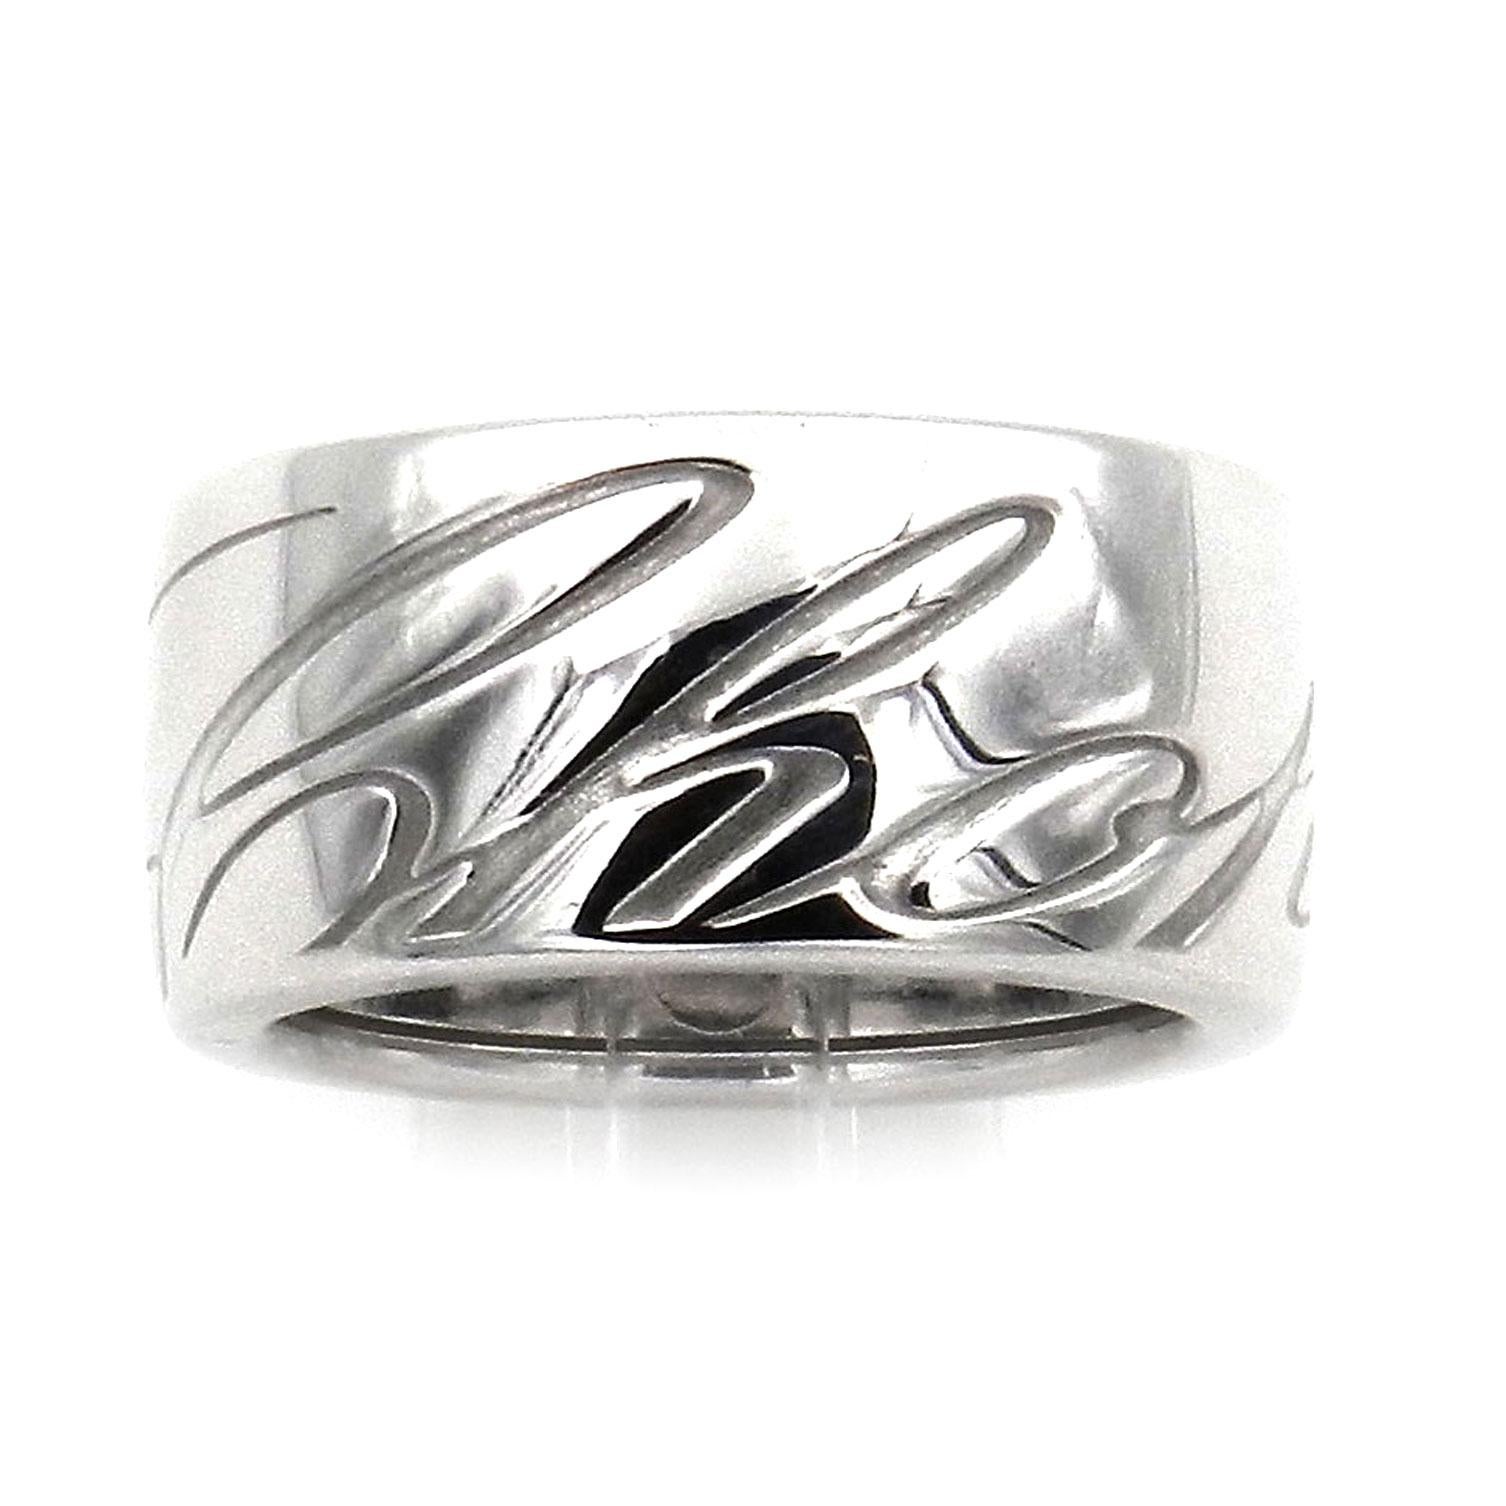 Chopard Chopardissimo 18K White Gold Ring Signature Band Ring 
 
Authentic Chopard  band ring made of 18 karat white gold from the Chopardissimo collection. The wide, luxurious band ring with the surrounding Chopard logo in a timeless design is made